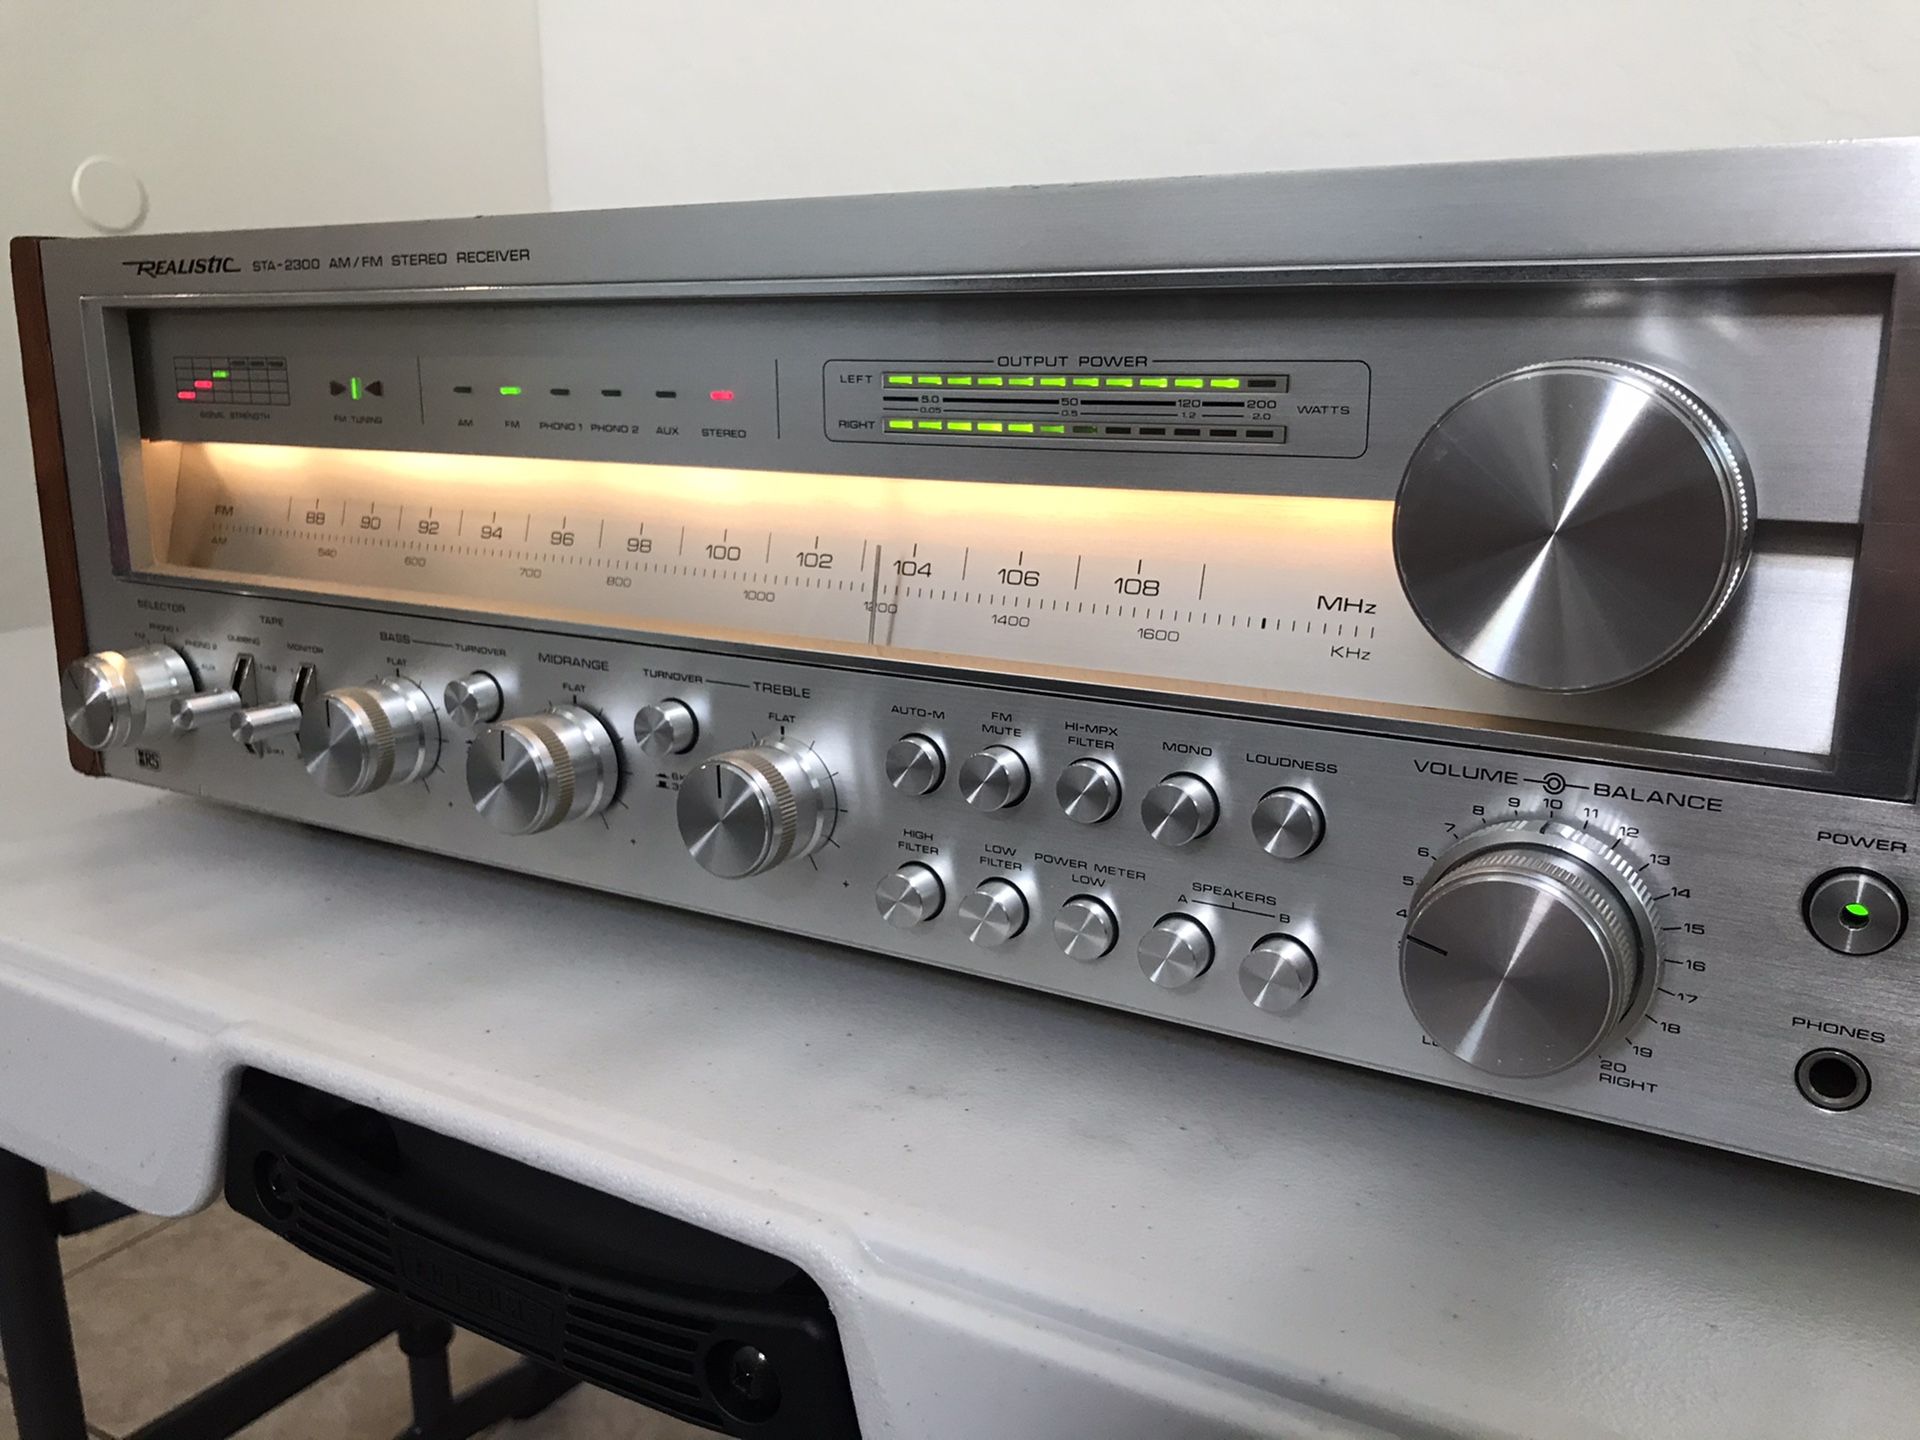 Realistic STA-2300 Vintage Stereo Receiver